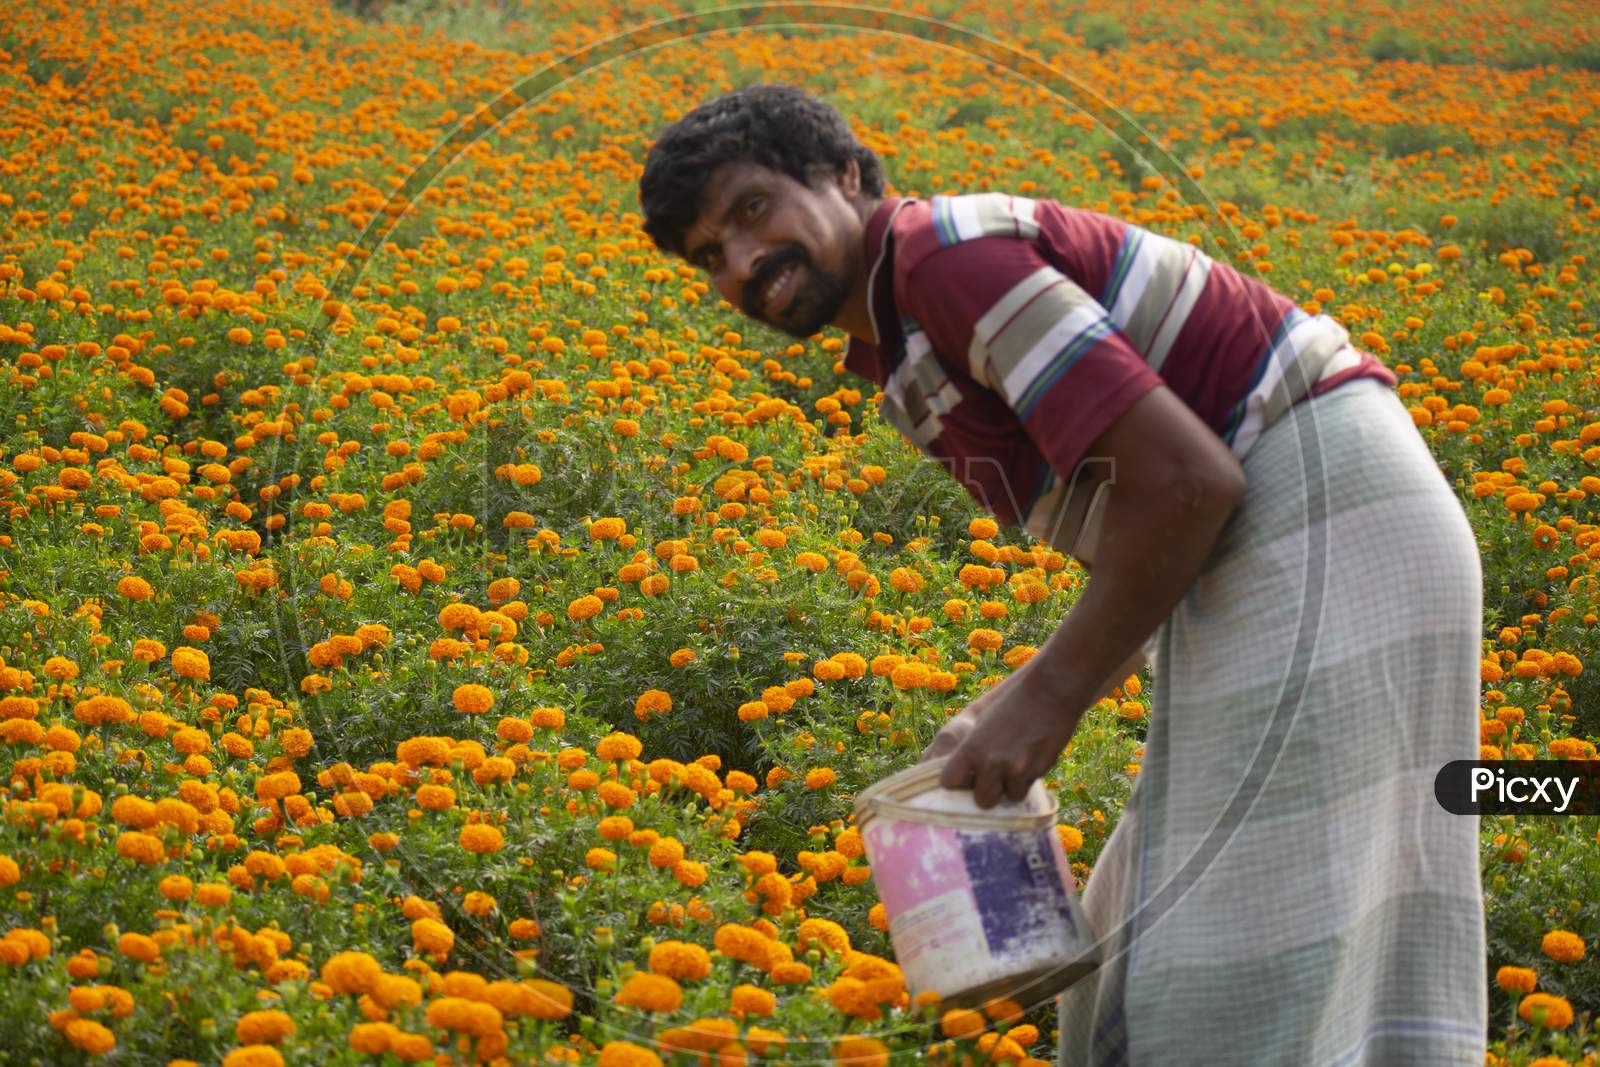 Khirai Midnapore, West Bengal, India - 11Th October 2020 : A Farmer Working In Flower Field And Collecting Flowers